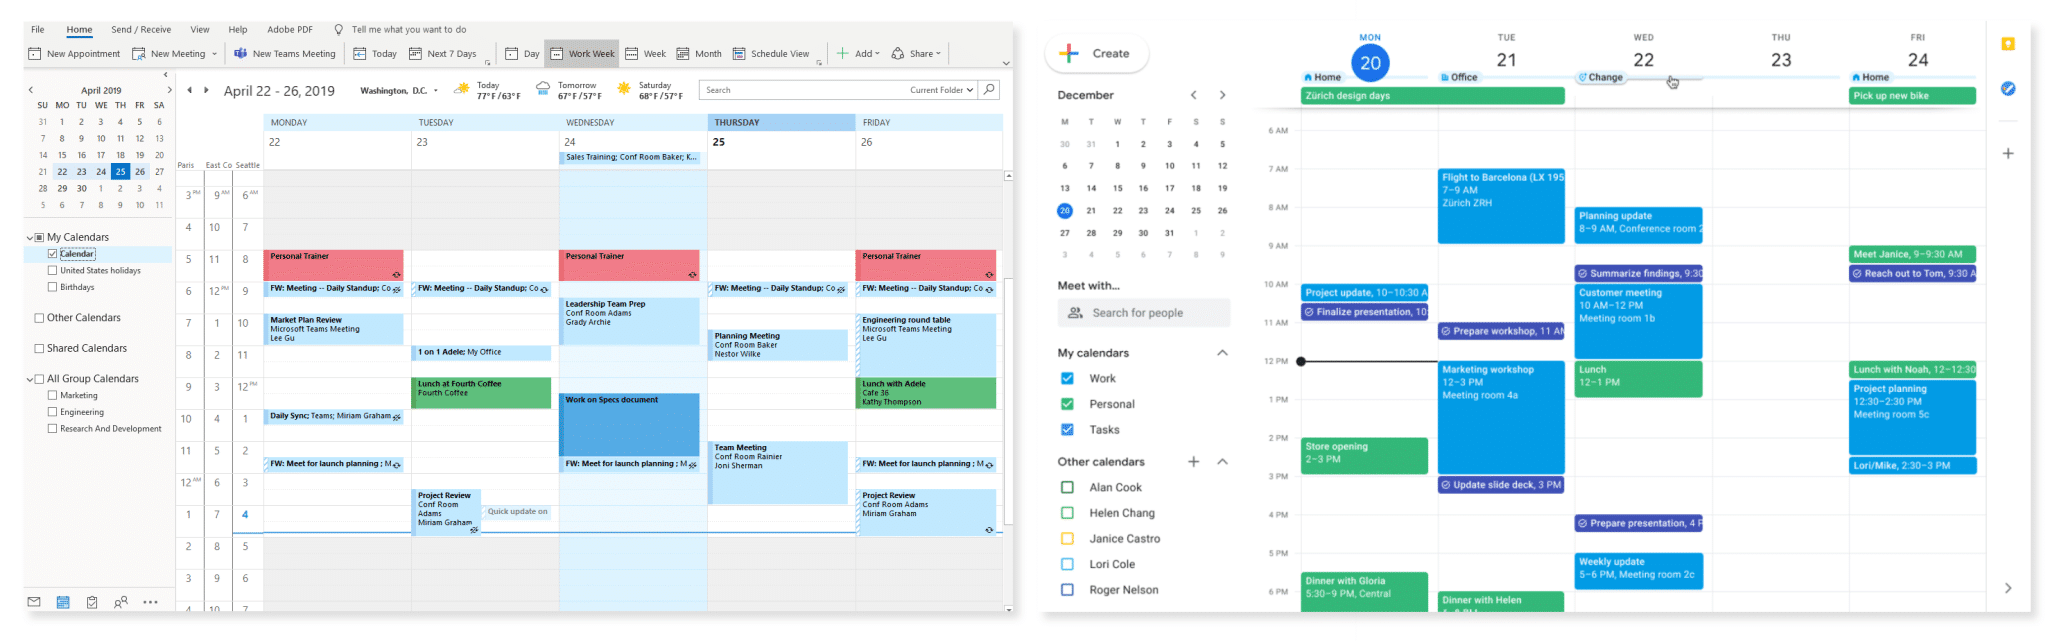 Side-by-side comparison of Outlook and Gmail calendars.